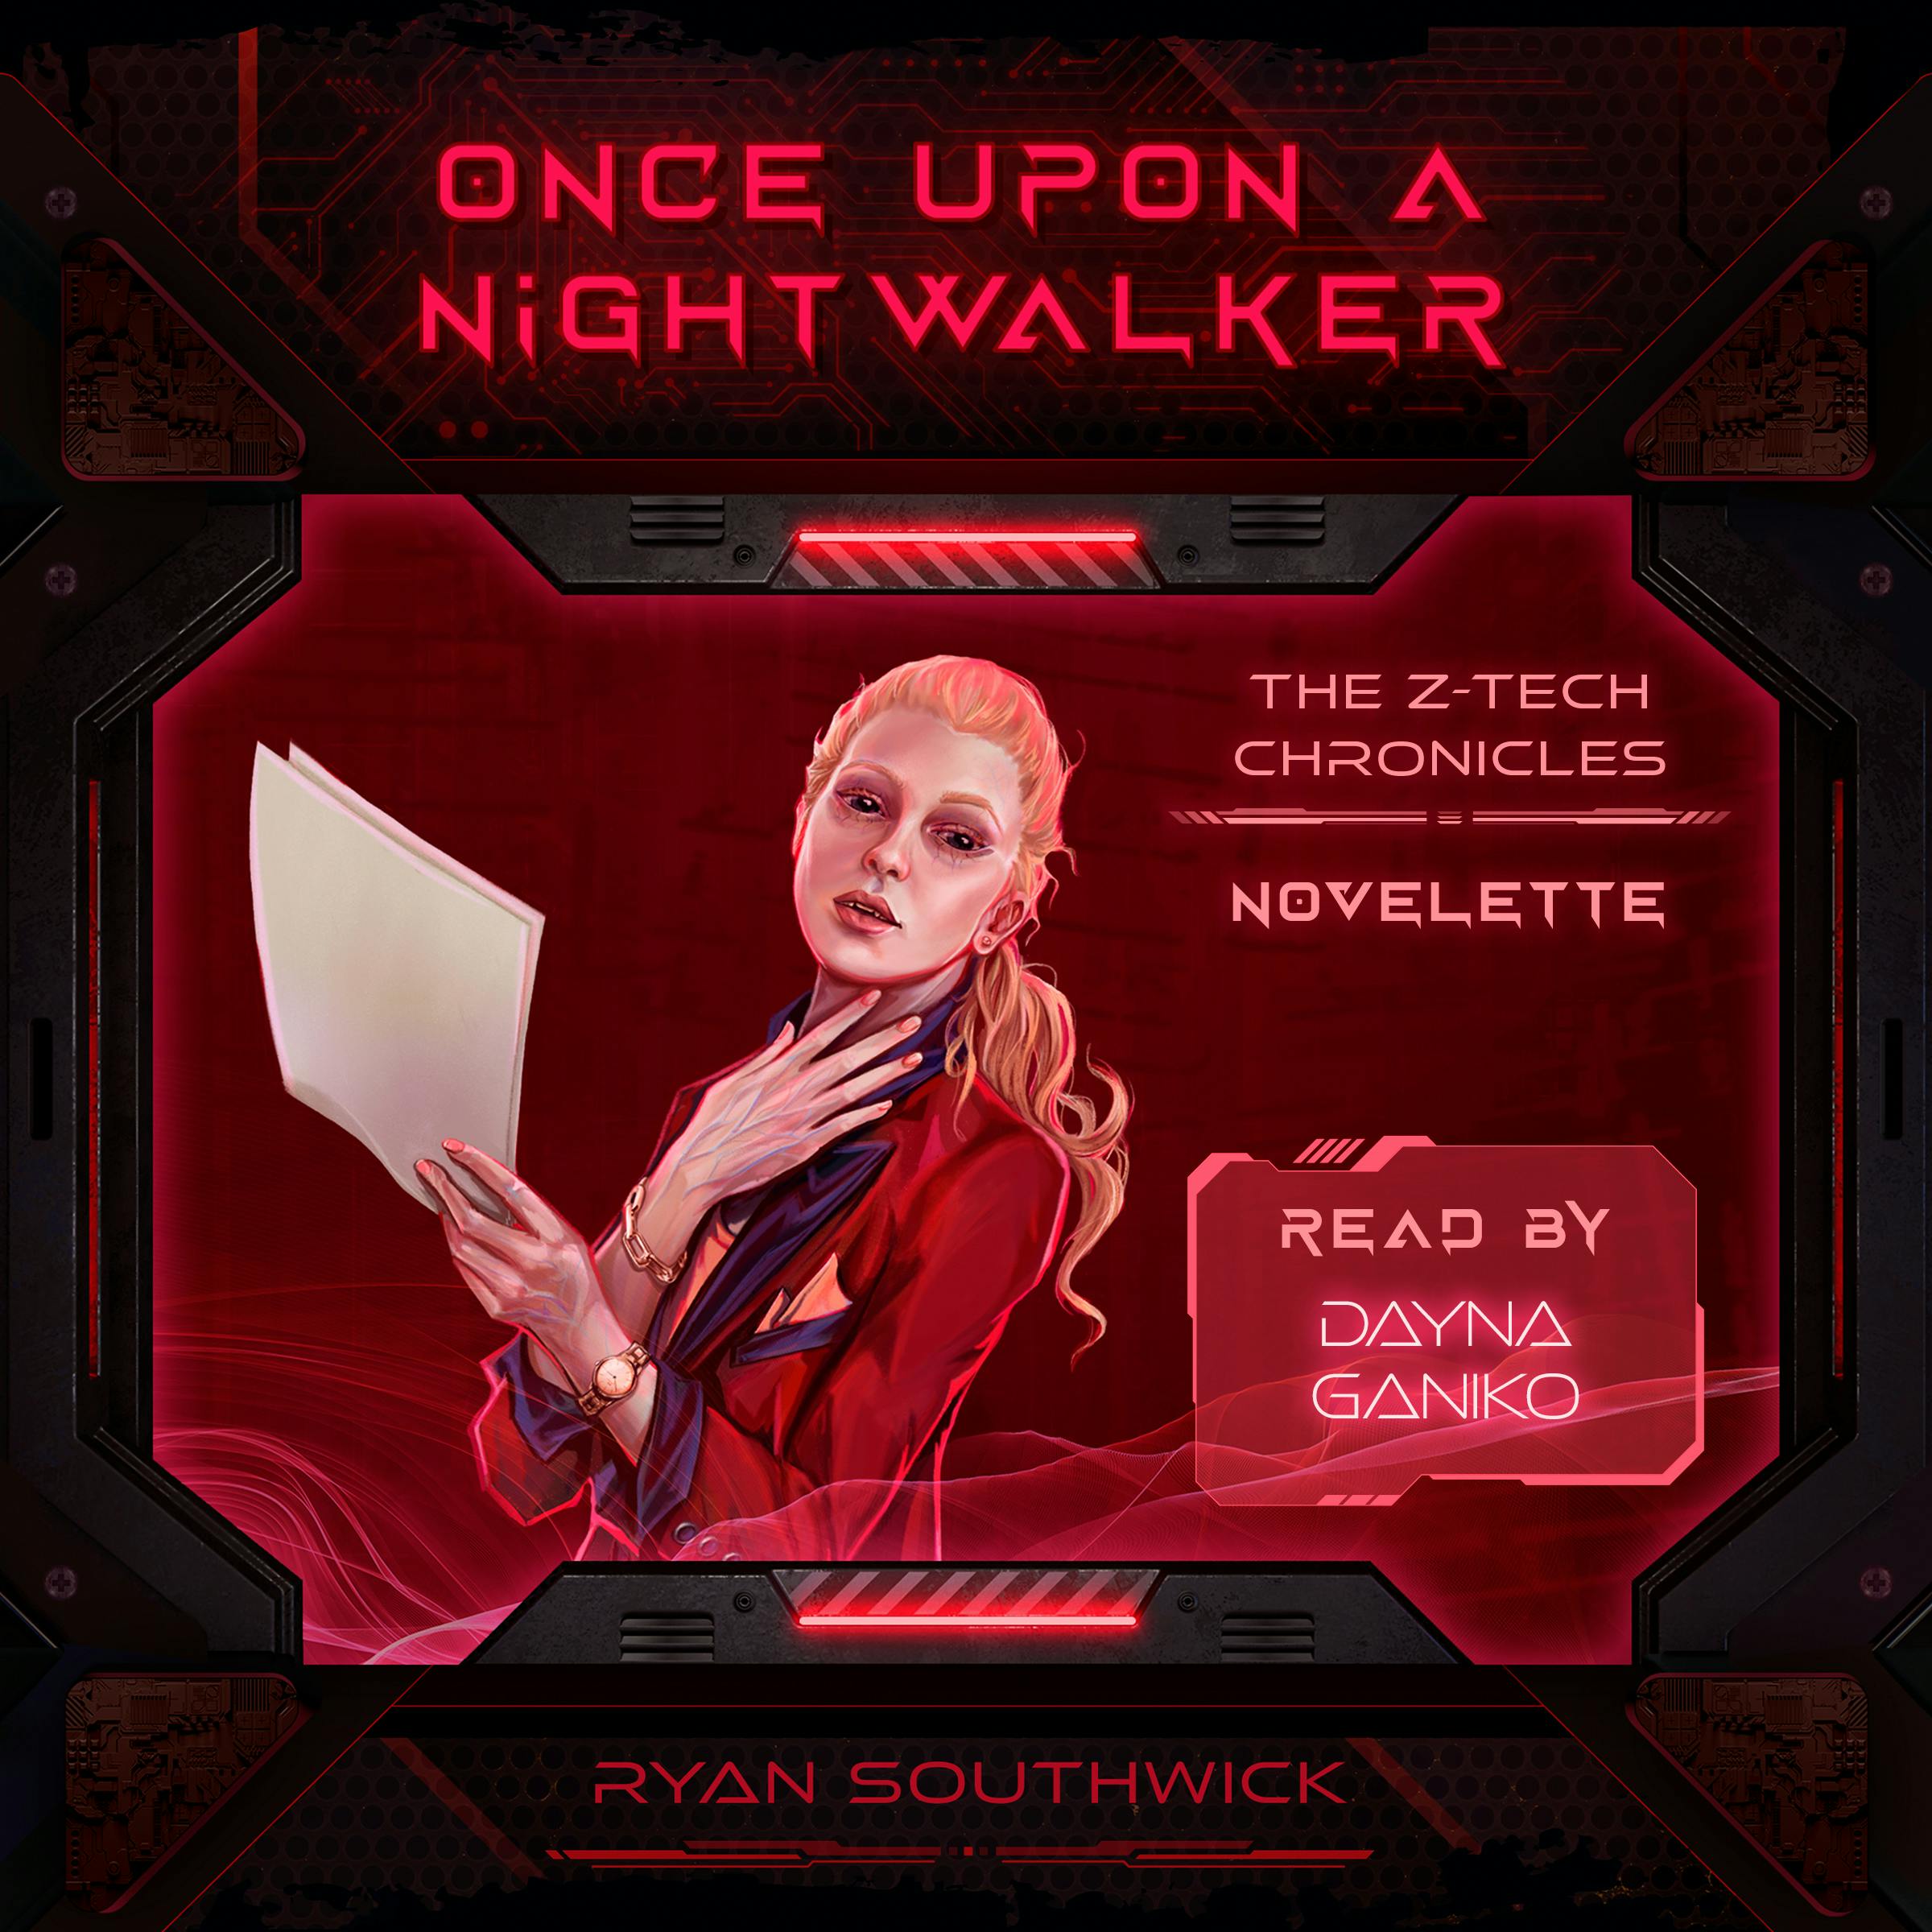 Once Upon a Nightwalker